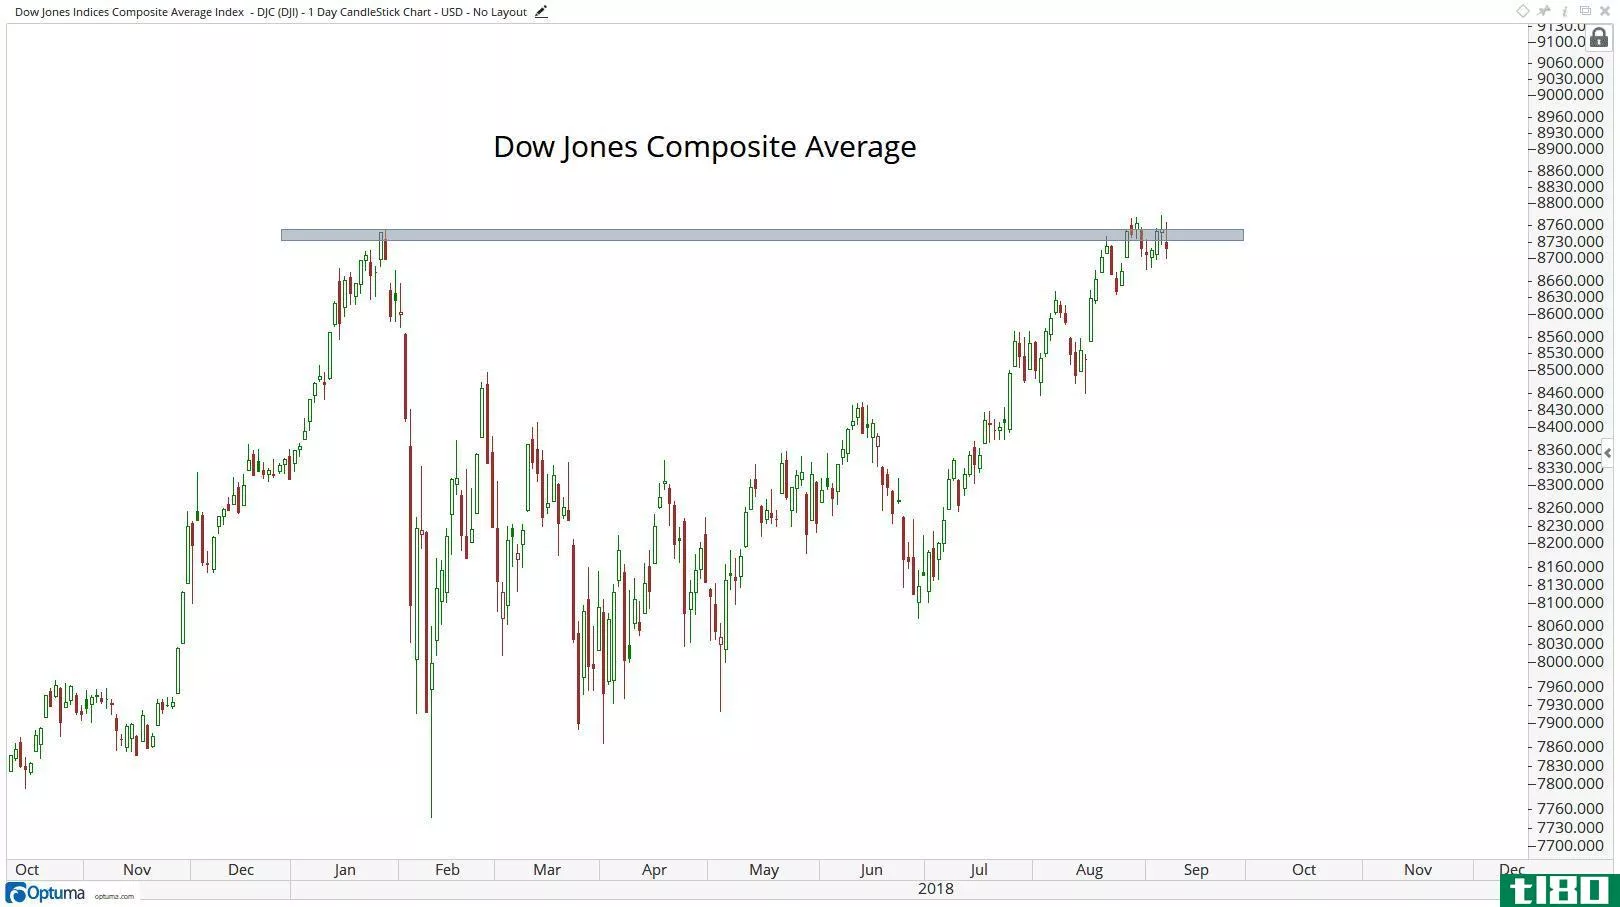 Technical chart showing the performance of the Dow Jones Composite Average